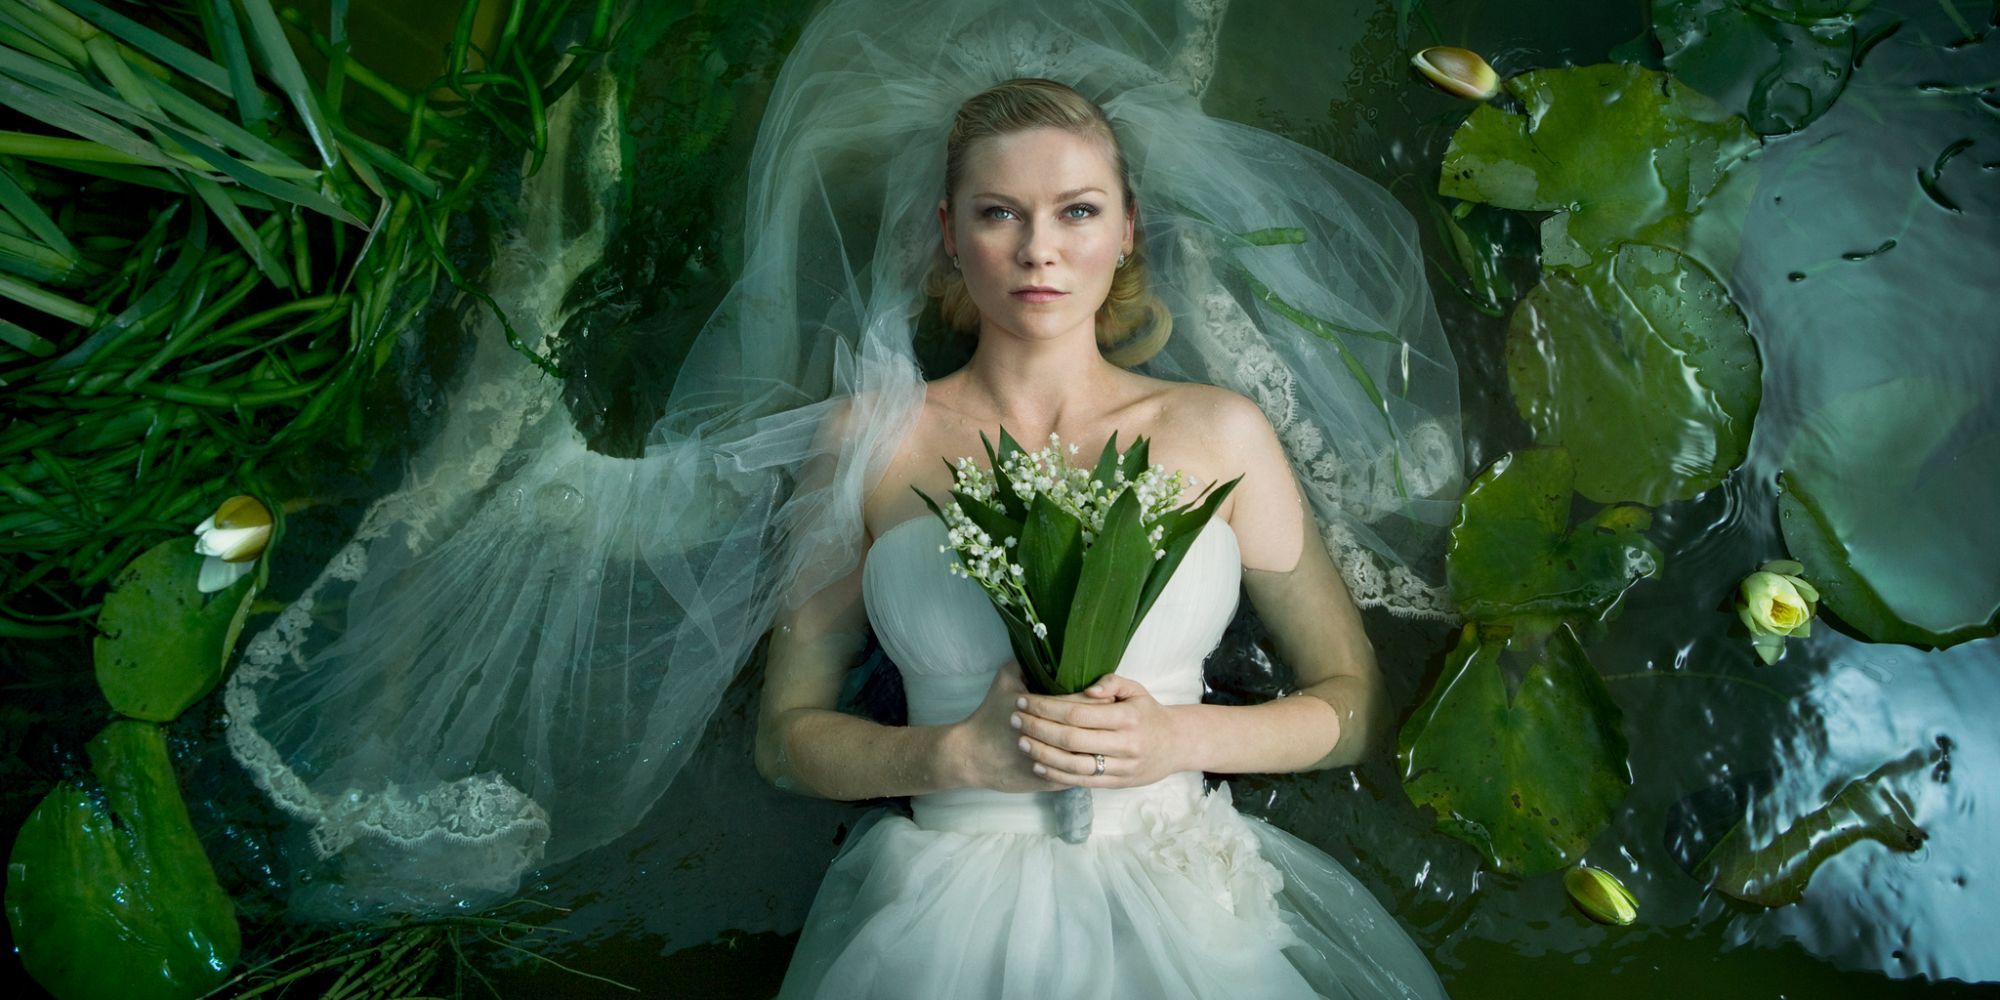 Kirsten Dunst on a wearing dress lying on a bed of water surrounded by leaves in a promo image for Melancholia.